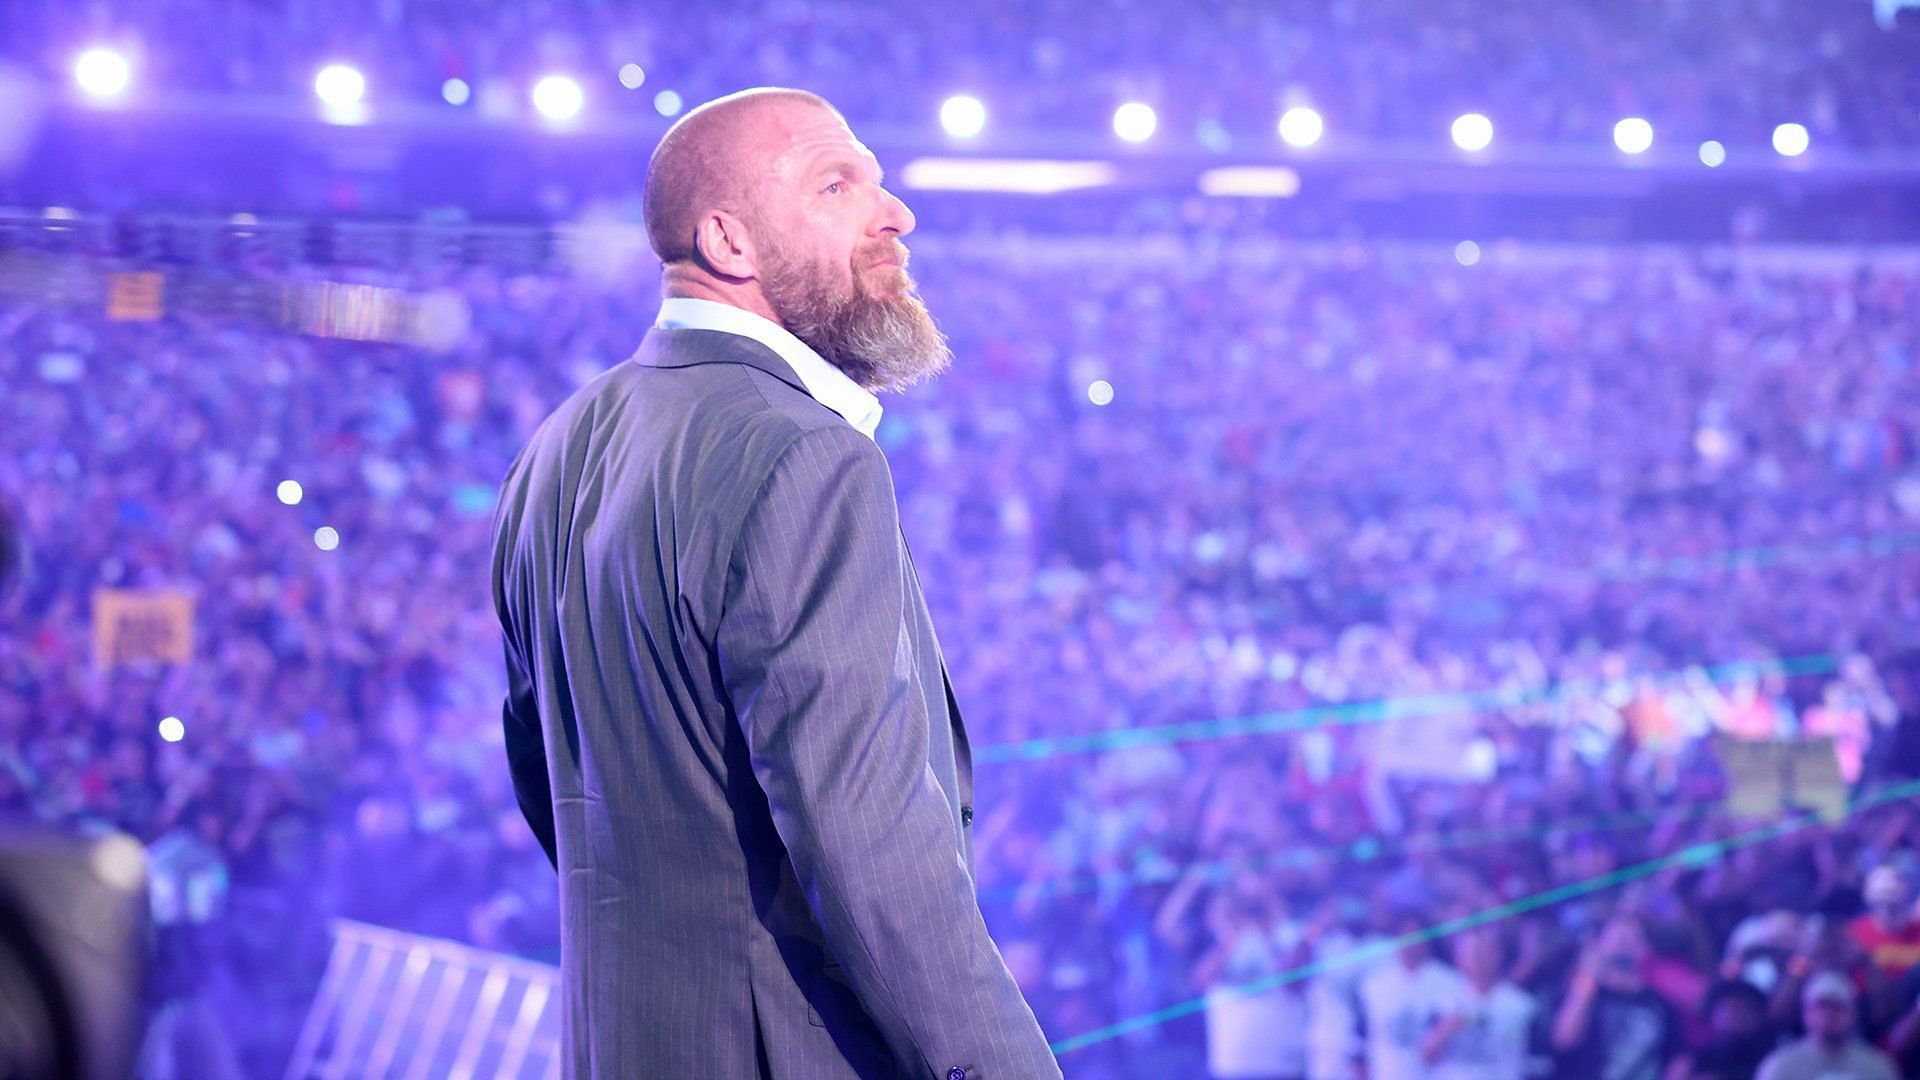 WWE Chief Content Officer Triple H looks at the WrestleMania crowd